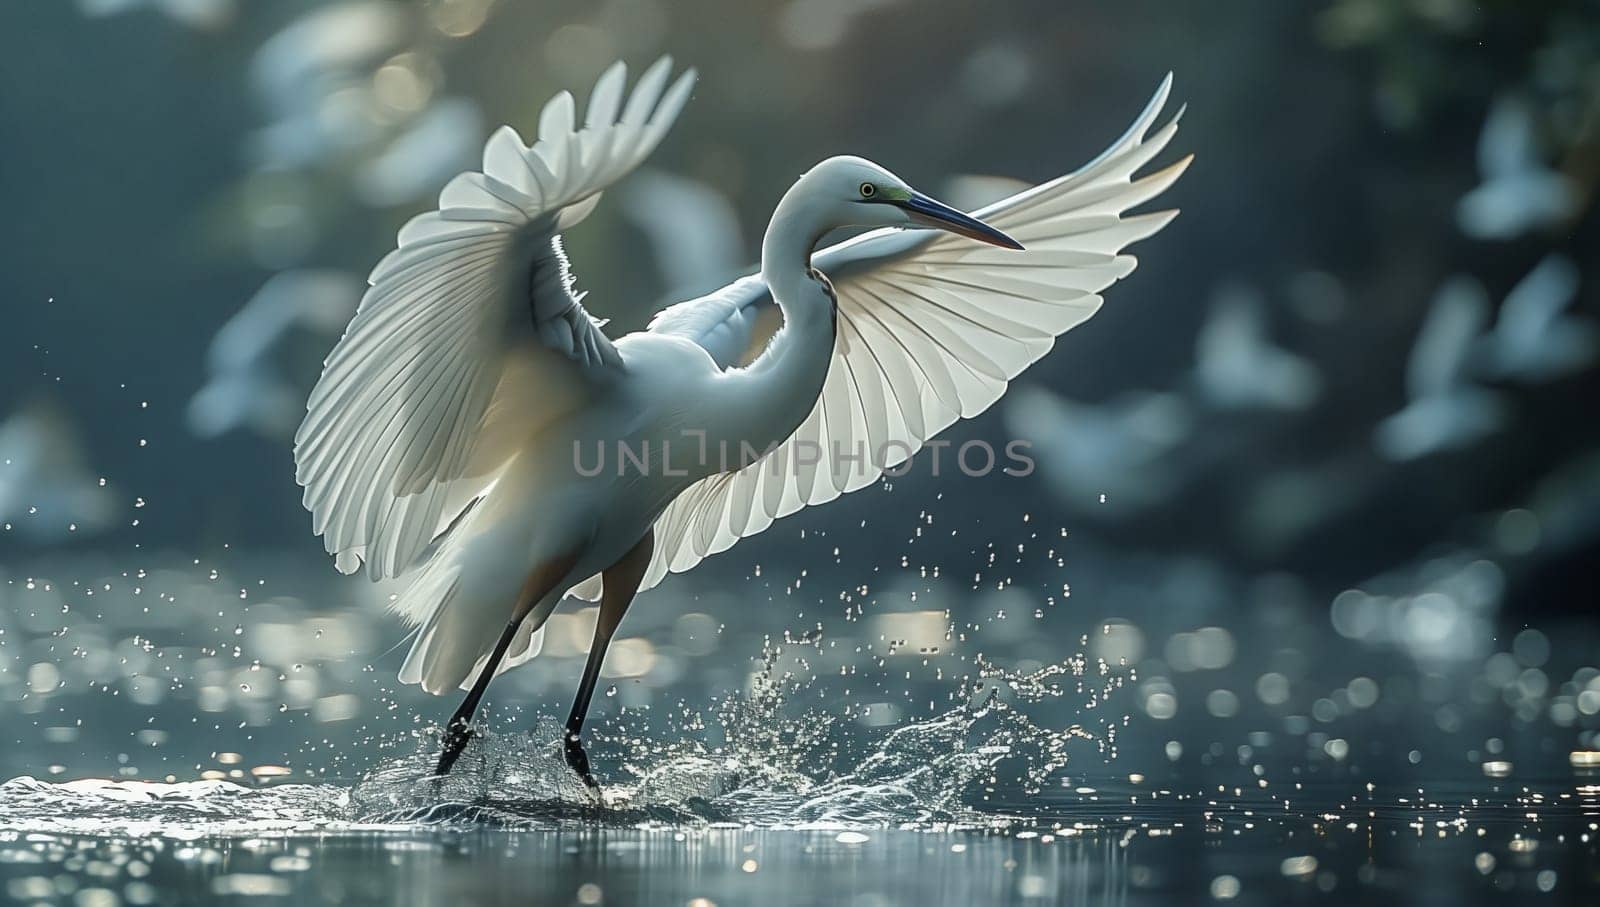 White heron standing in water, wings spread in the breeze by richwolf